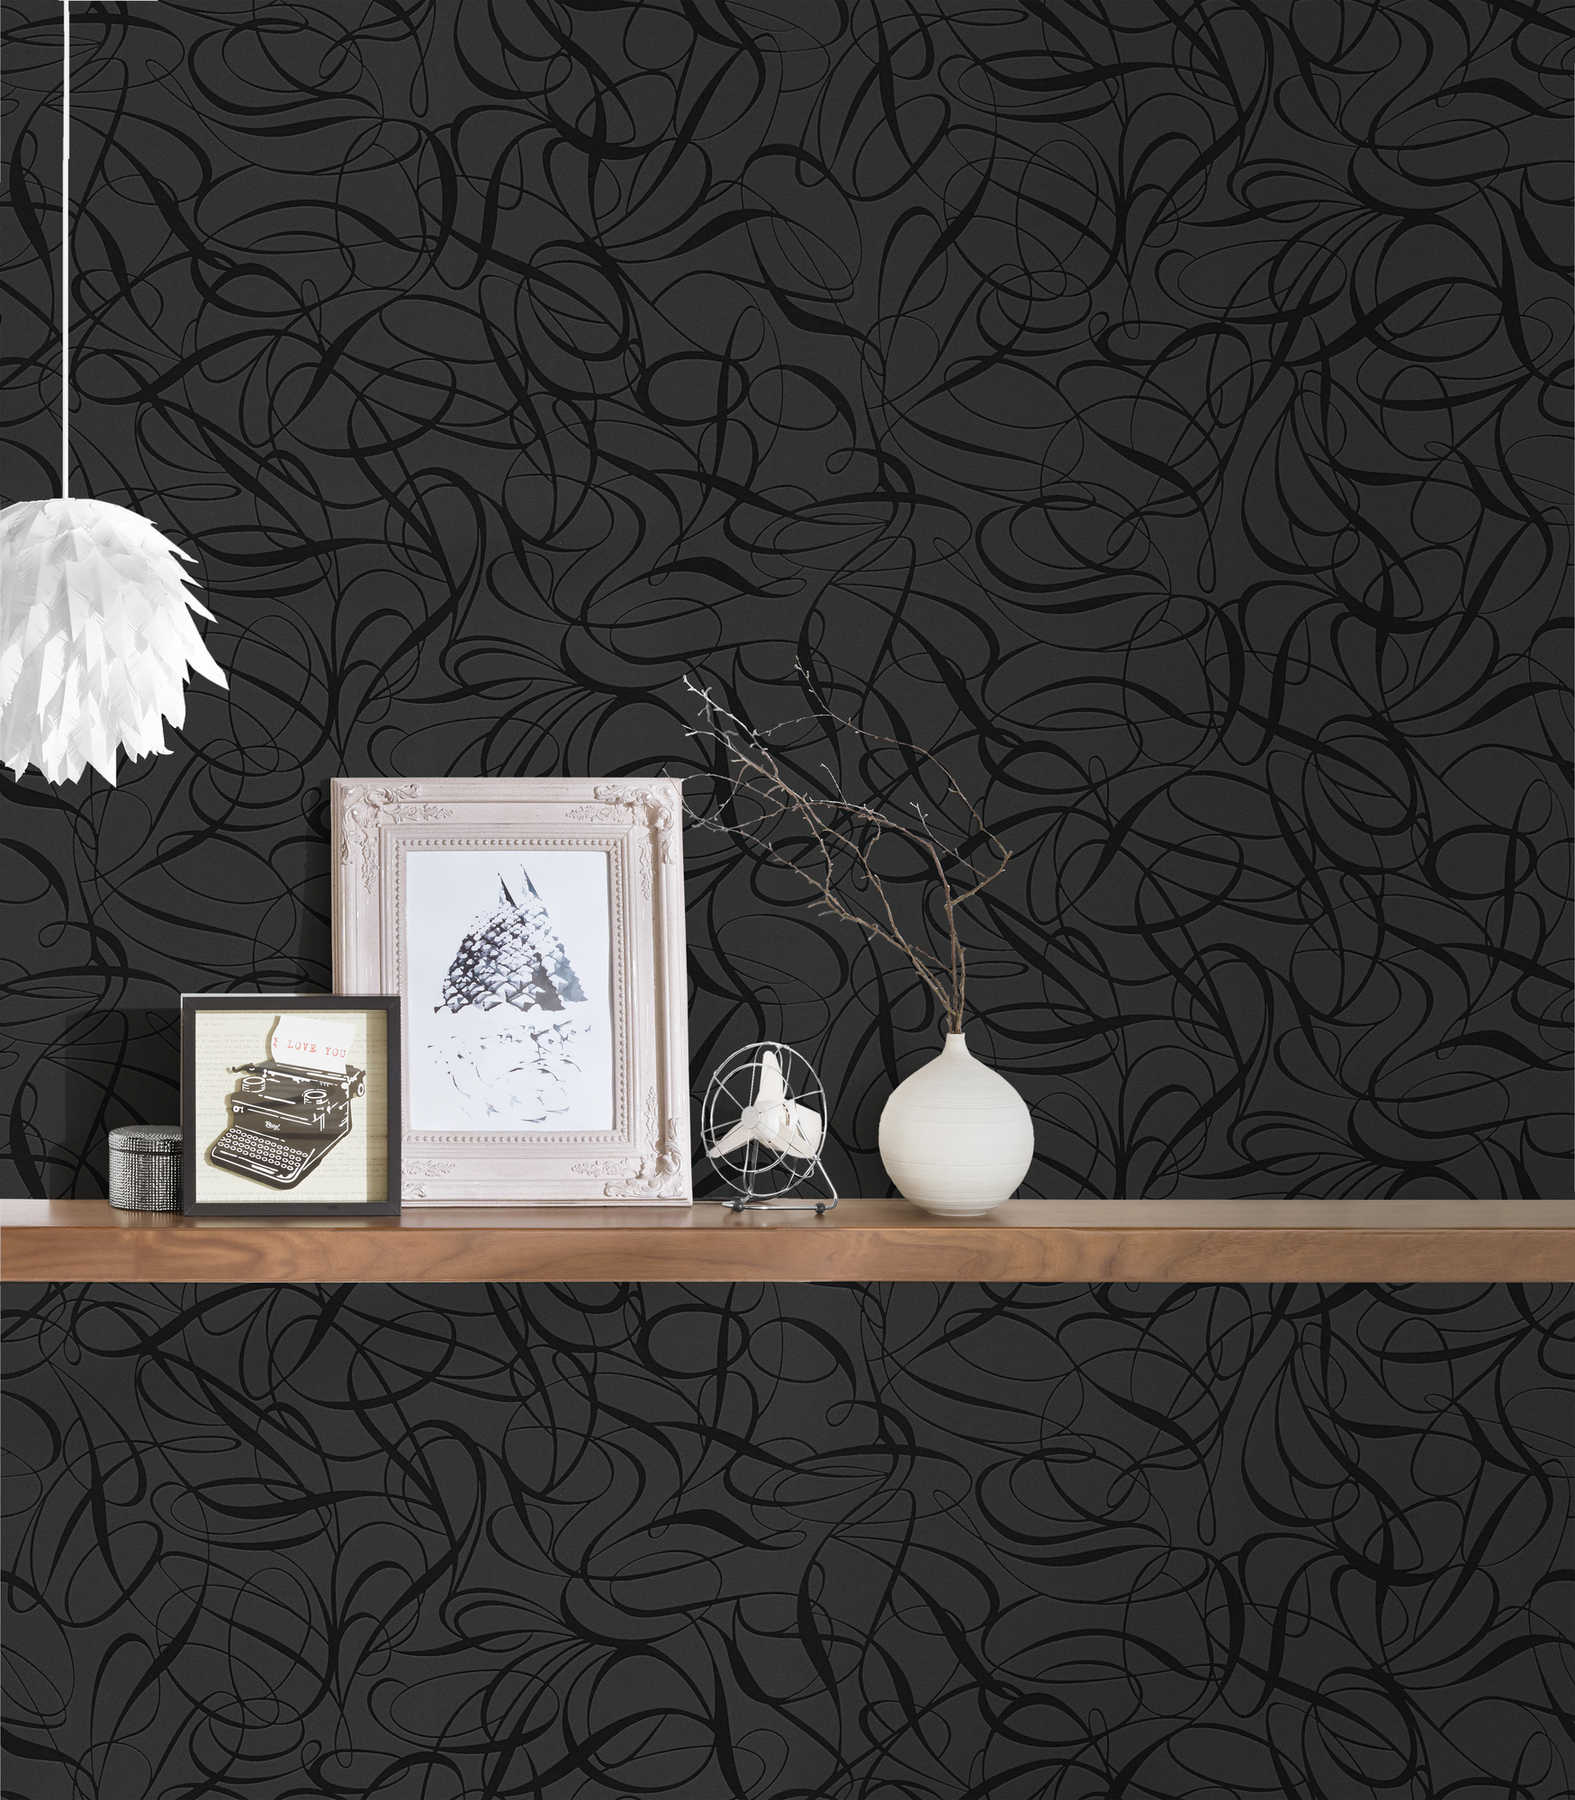             Non-woven wallpaper line pattern and glossy effect - black, metallic
        